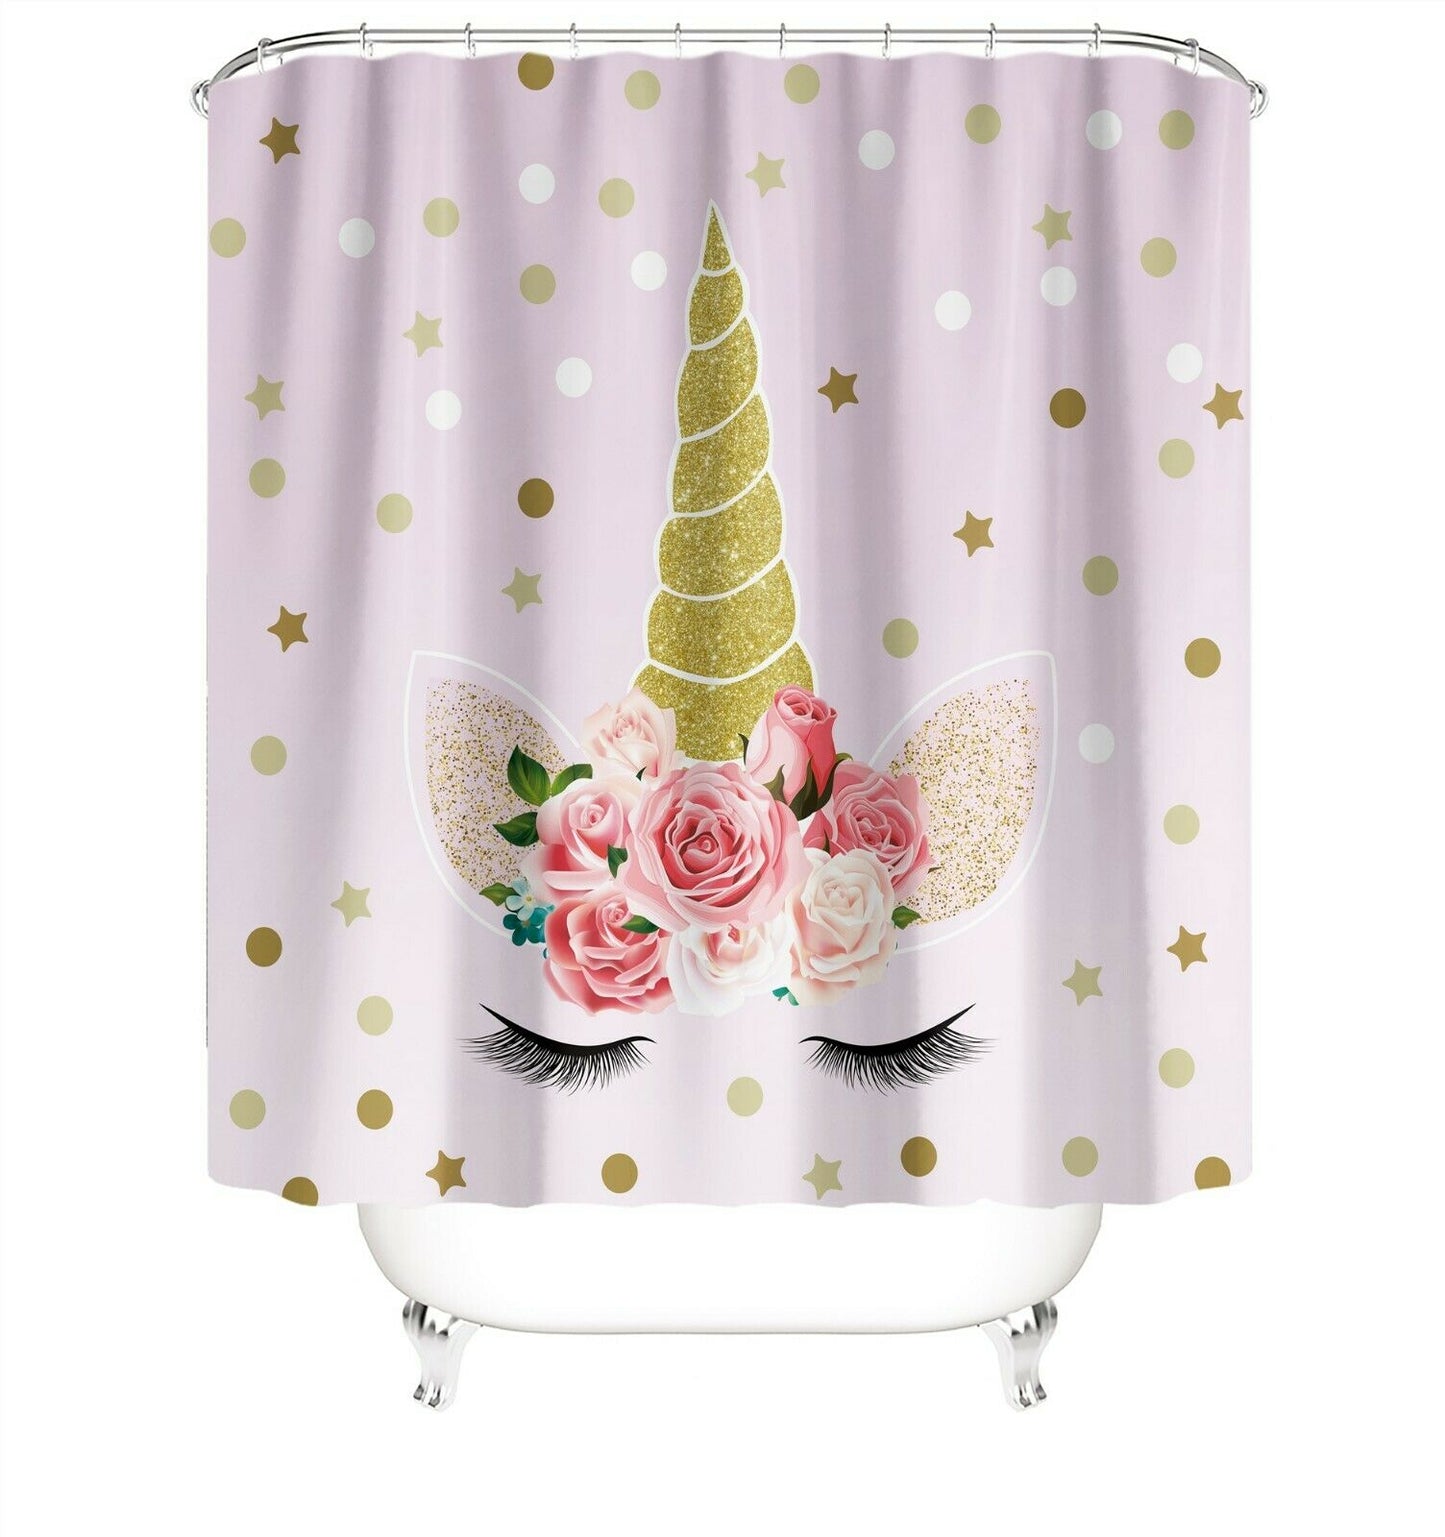 Unicorn Floral Fabric Shower Curtain-STYLEGOING